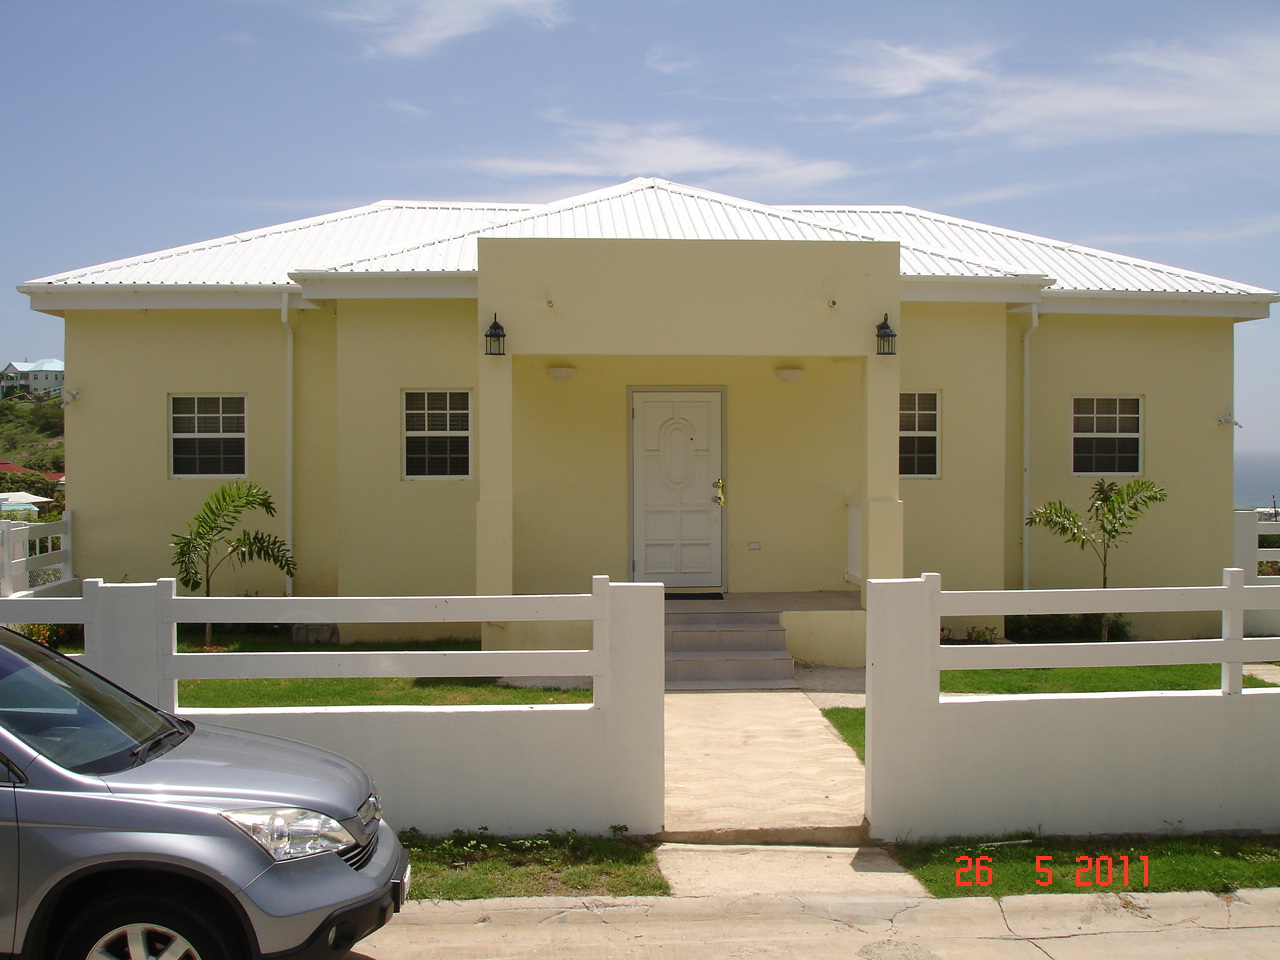 2 Bedroom House For Rent In Frigate Bay